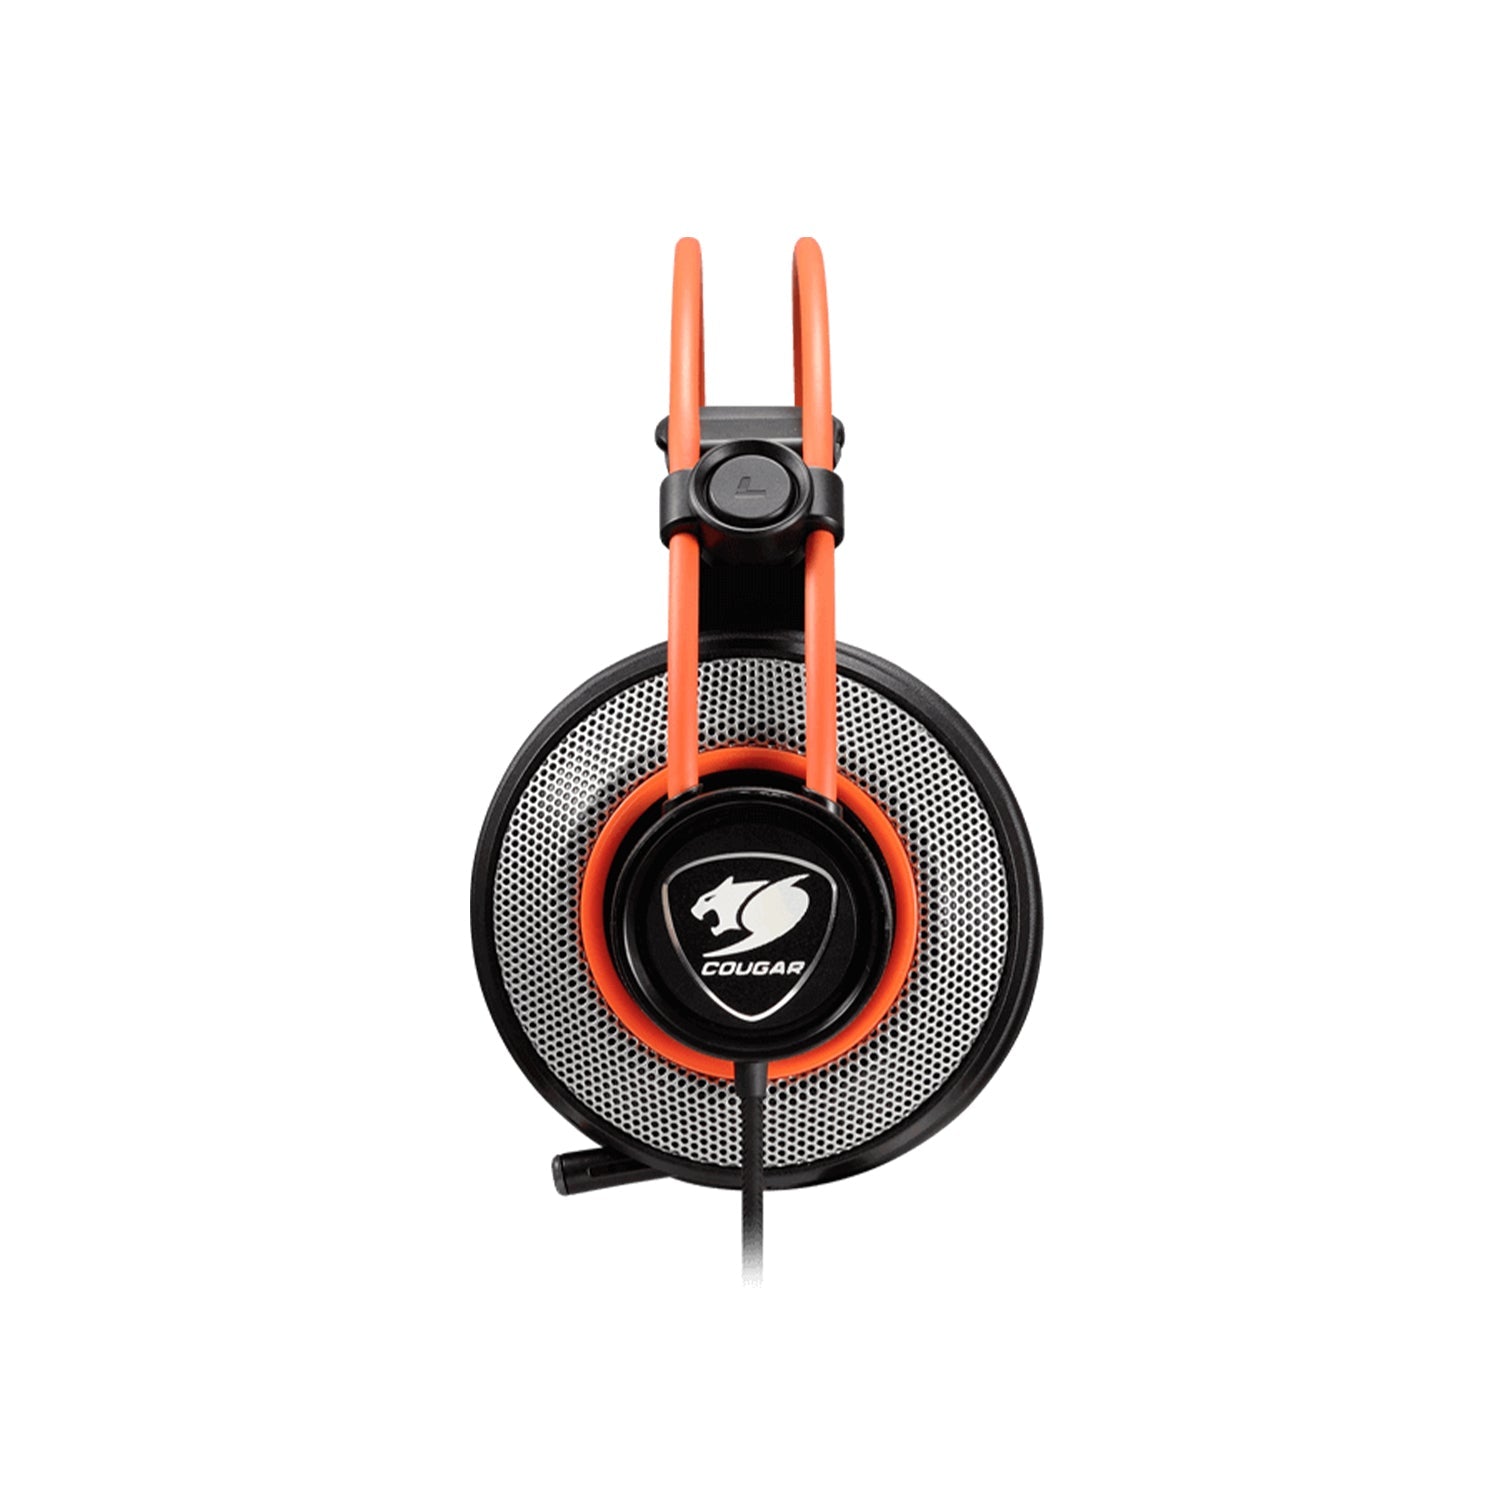 Cougar Immersa Cuffie Gaming 3.5mm